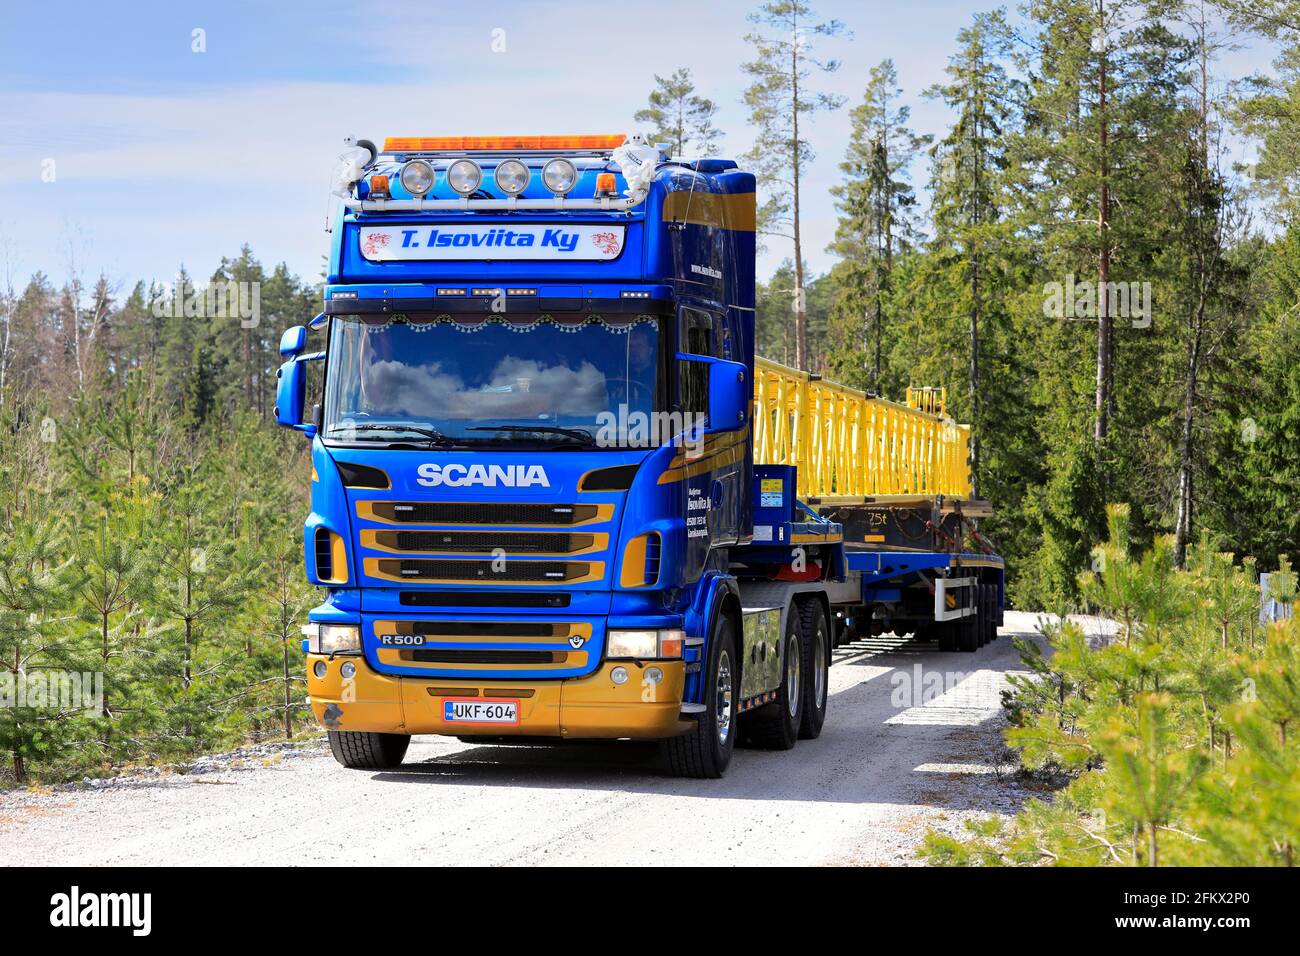 Scania semi trailer of T. Isoviita Ky transports part of service crane for wind turbine blade replacement. Oversize load. Salo, Finland. Apr 30, 2021. Stock Photo